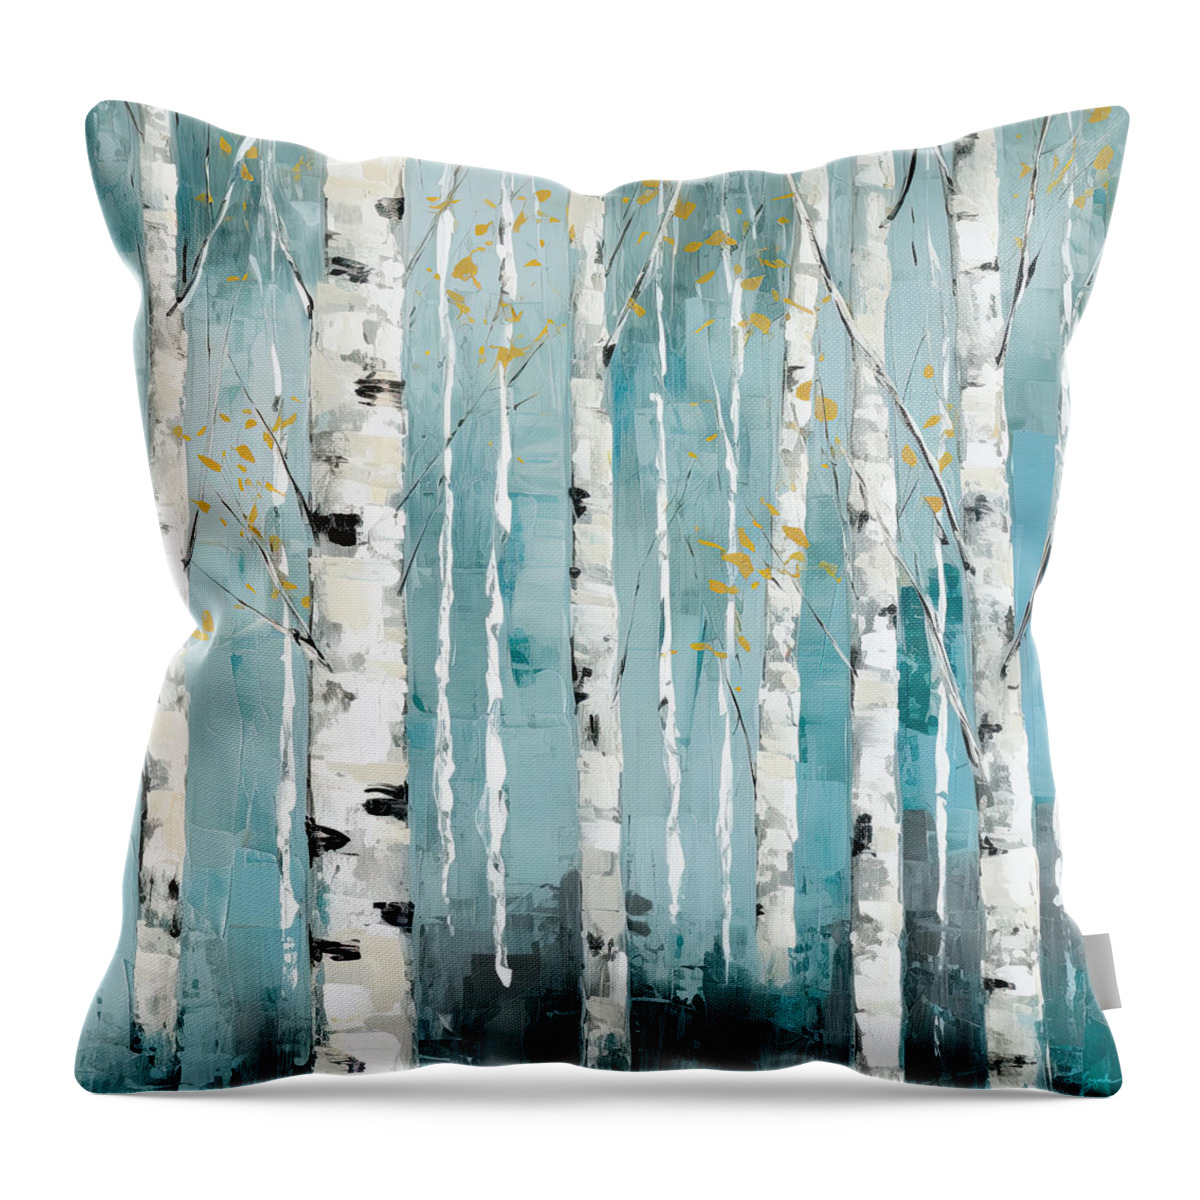 Turquoise Throw Pillow featuring the painting Turquoise Birch Trees by Lourry Legarde